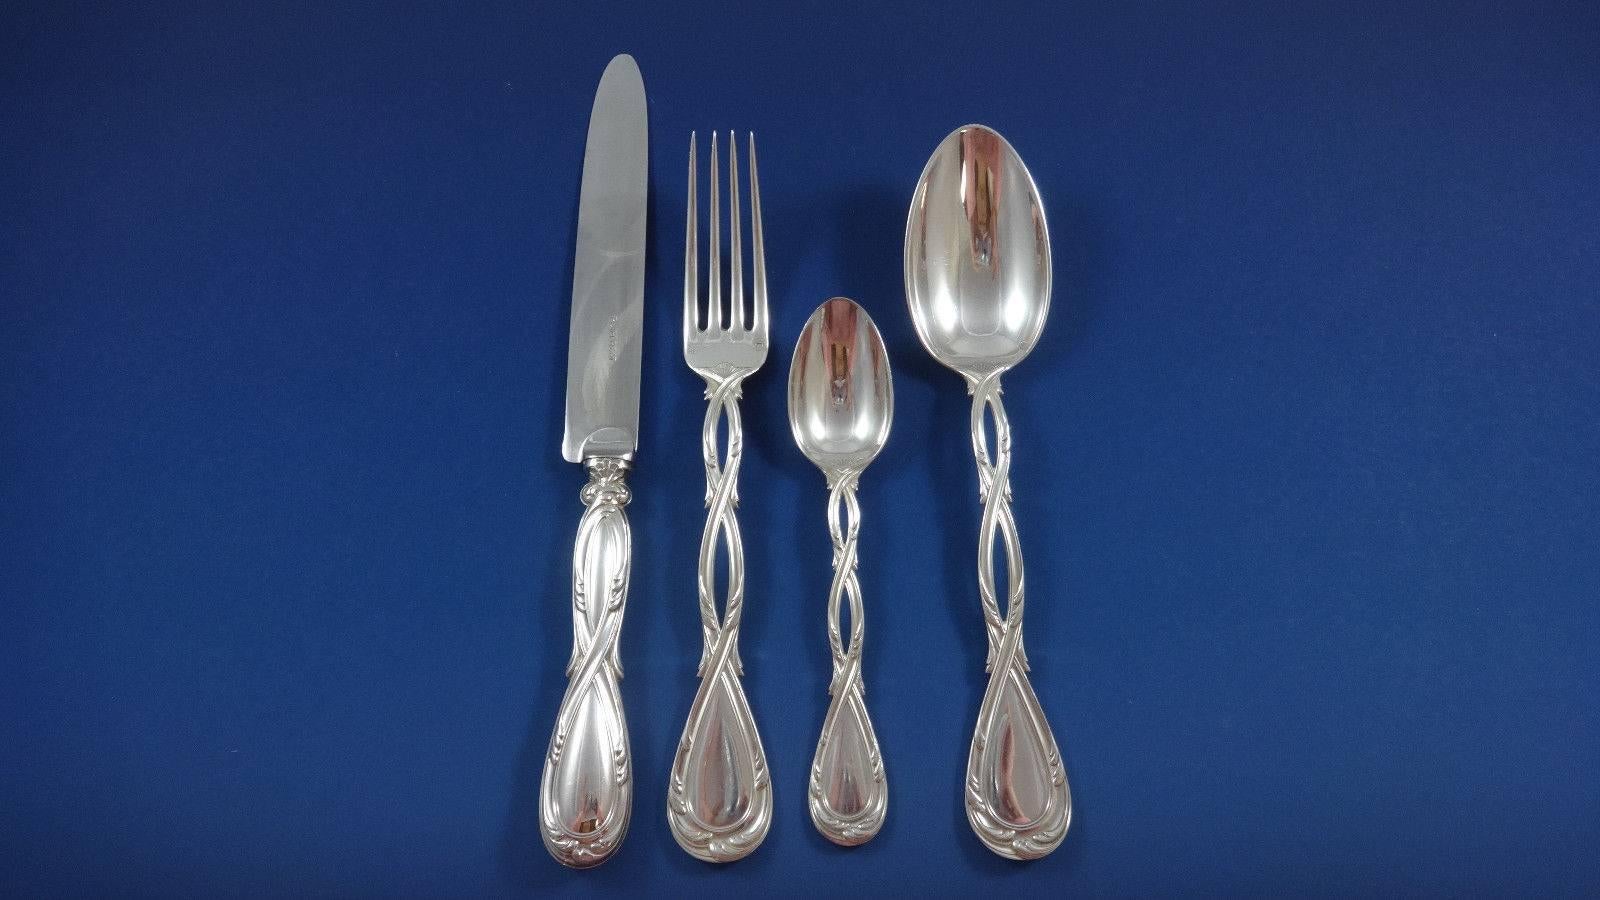 These handcrafted utensils show off the exceptional skill of the legendary Puiforcat silversmiths. The high-quality of Puiforcat cutlery is also revealed in the high percentage of 950/1000 sterling silver. Handmade, exceptional quality. 

Fabulous